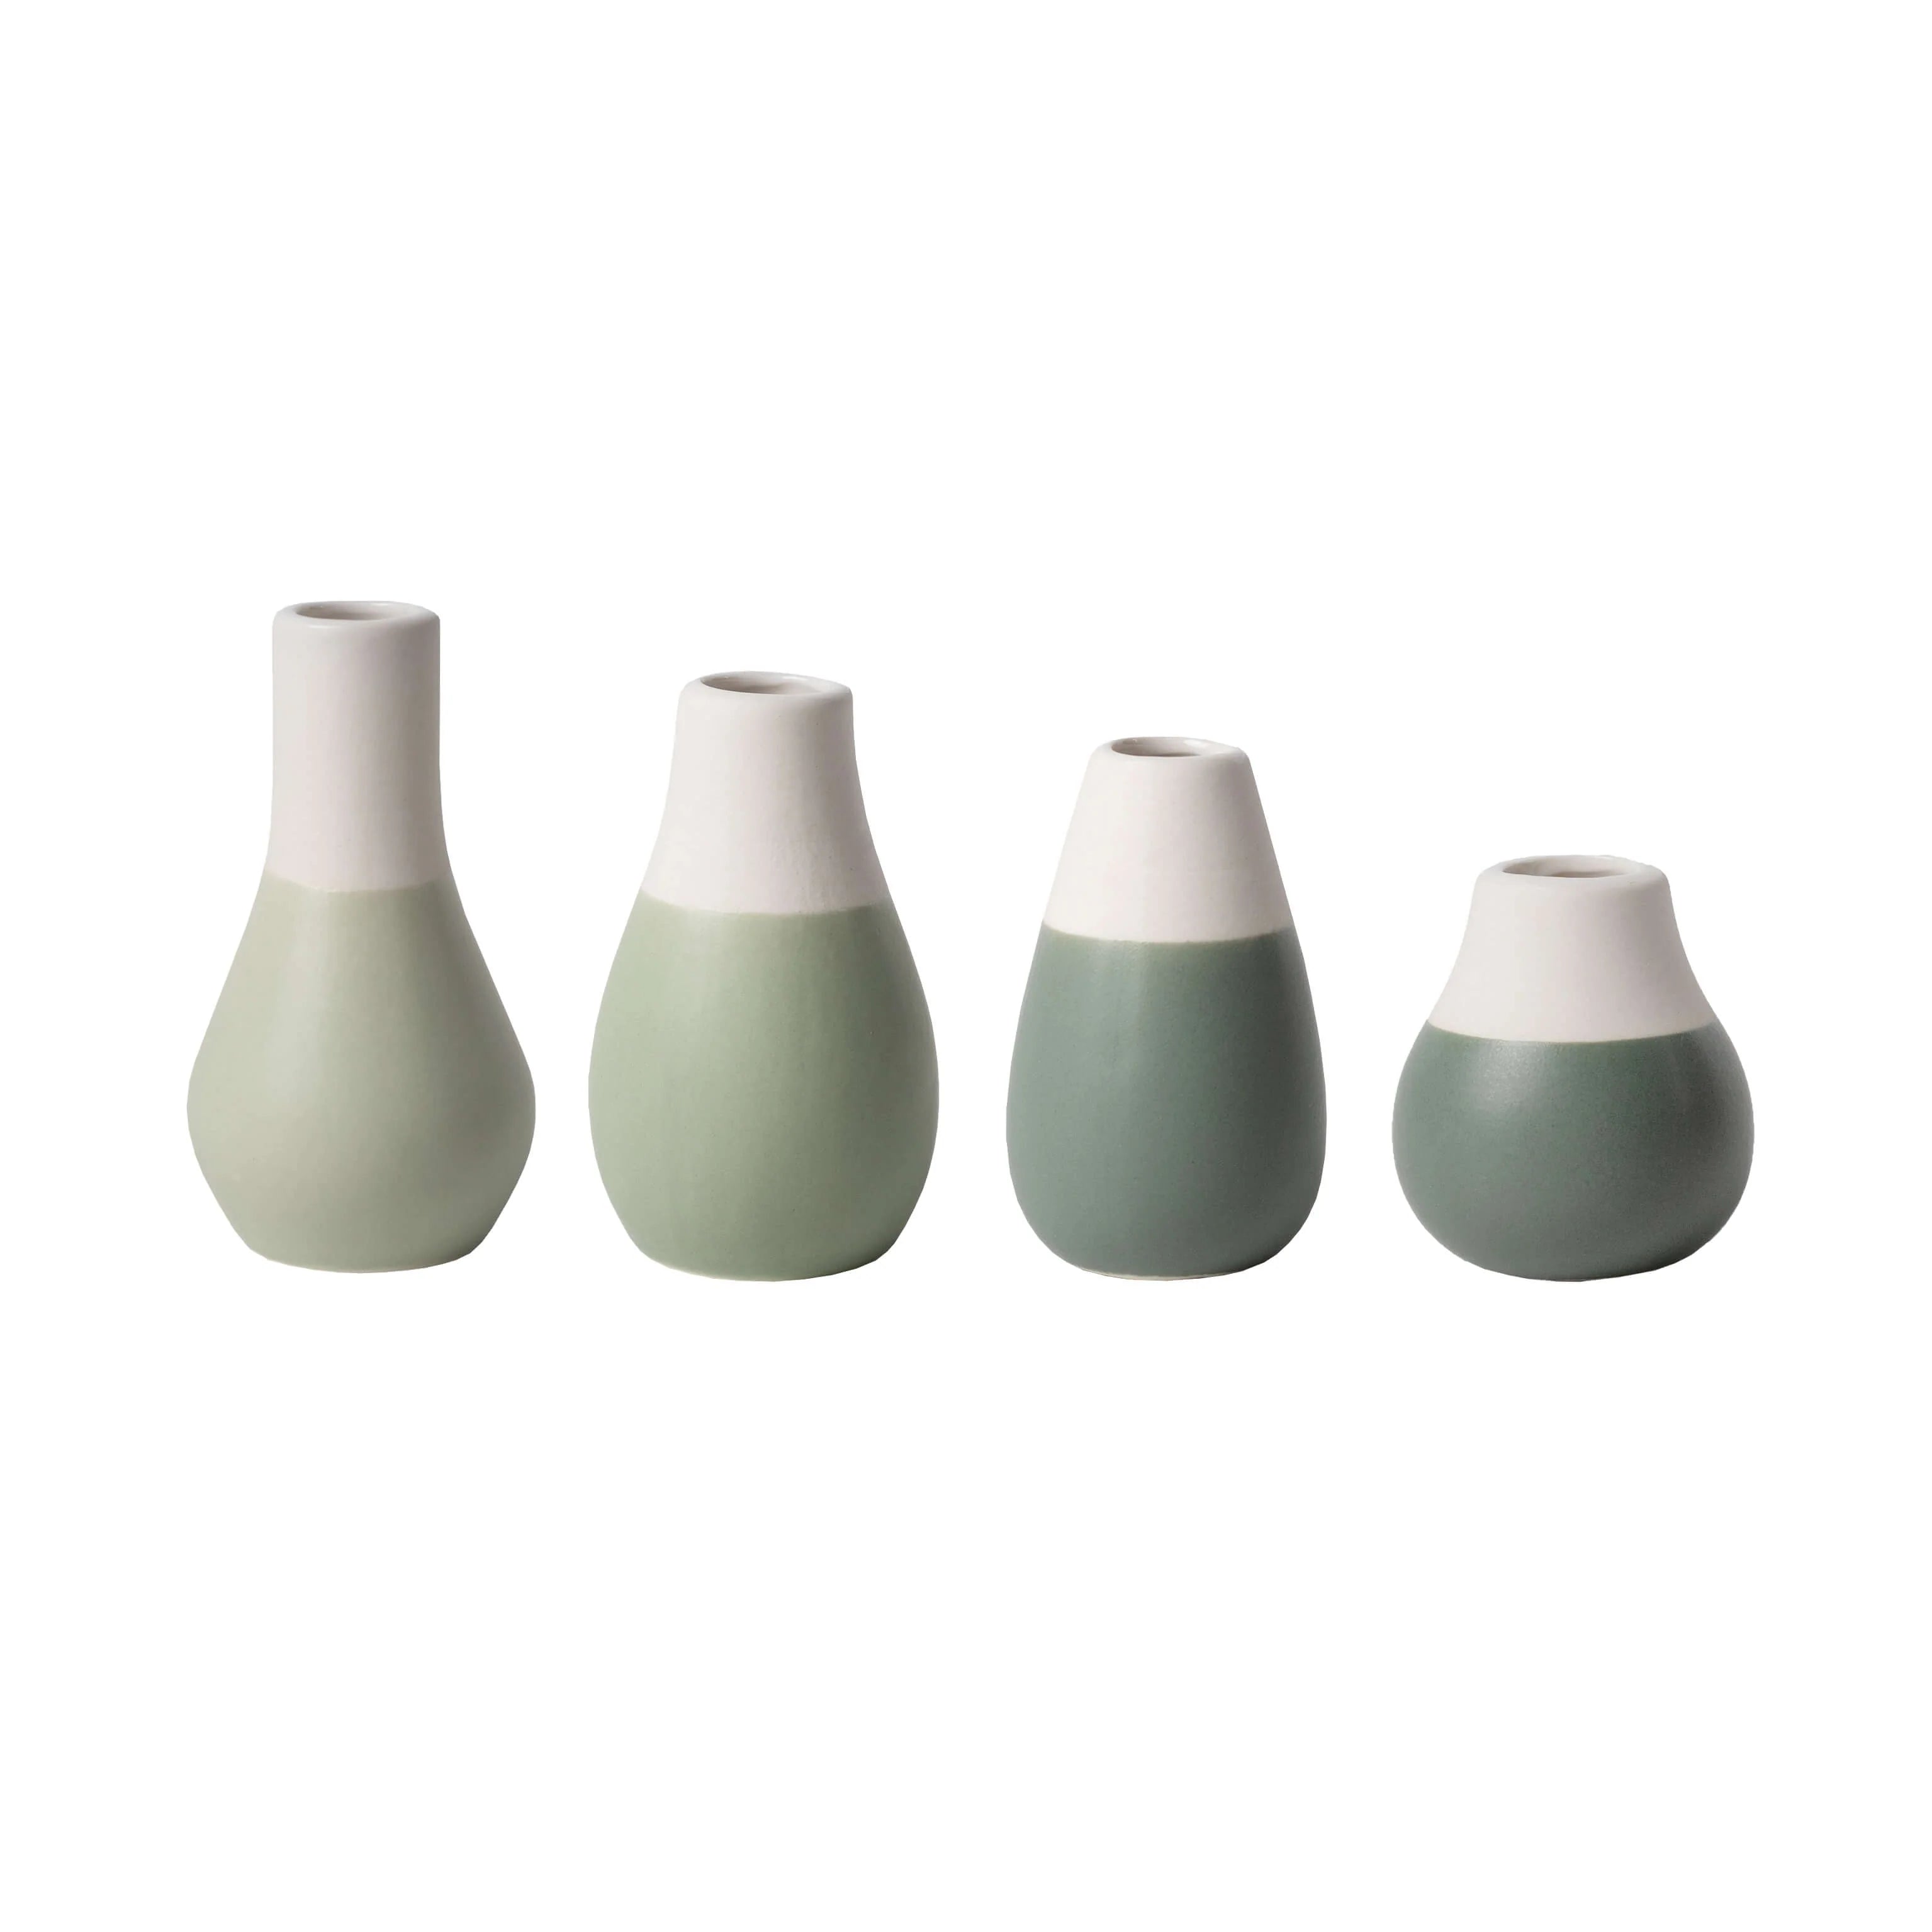 Pastel Two-Tone Mini Vases - Set Of 4 - Shades Of Green Vases